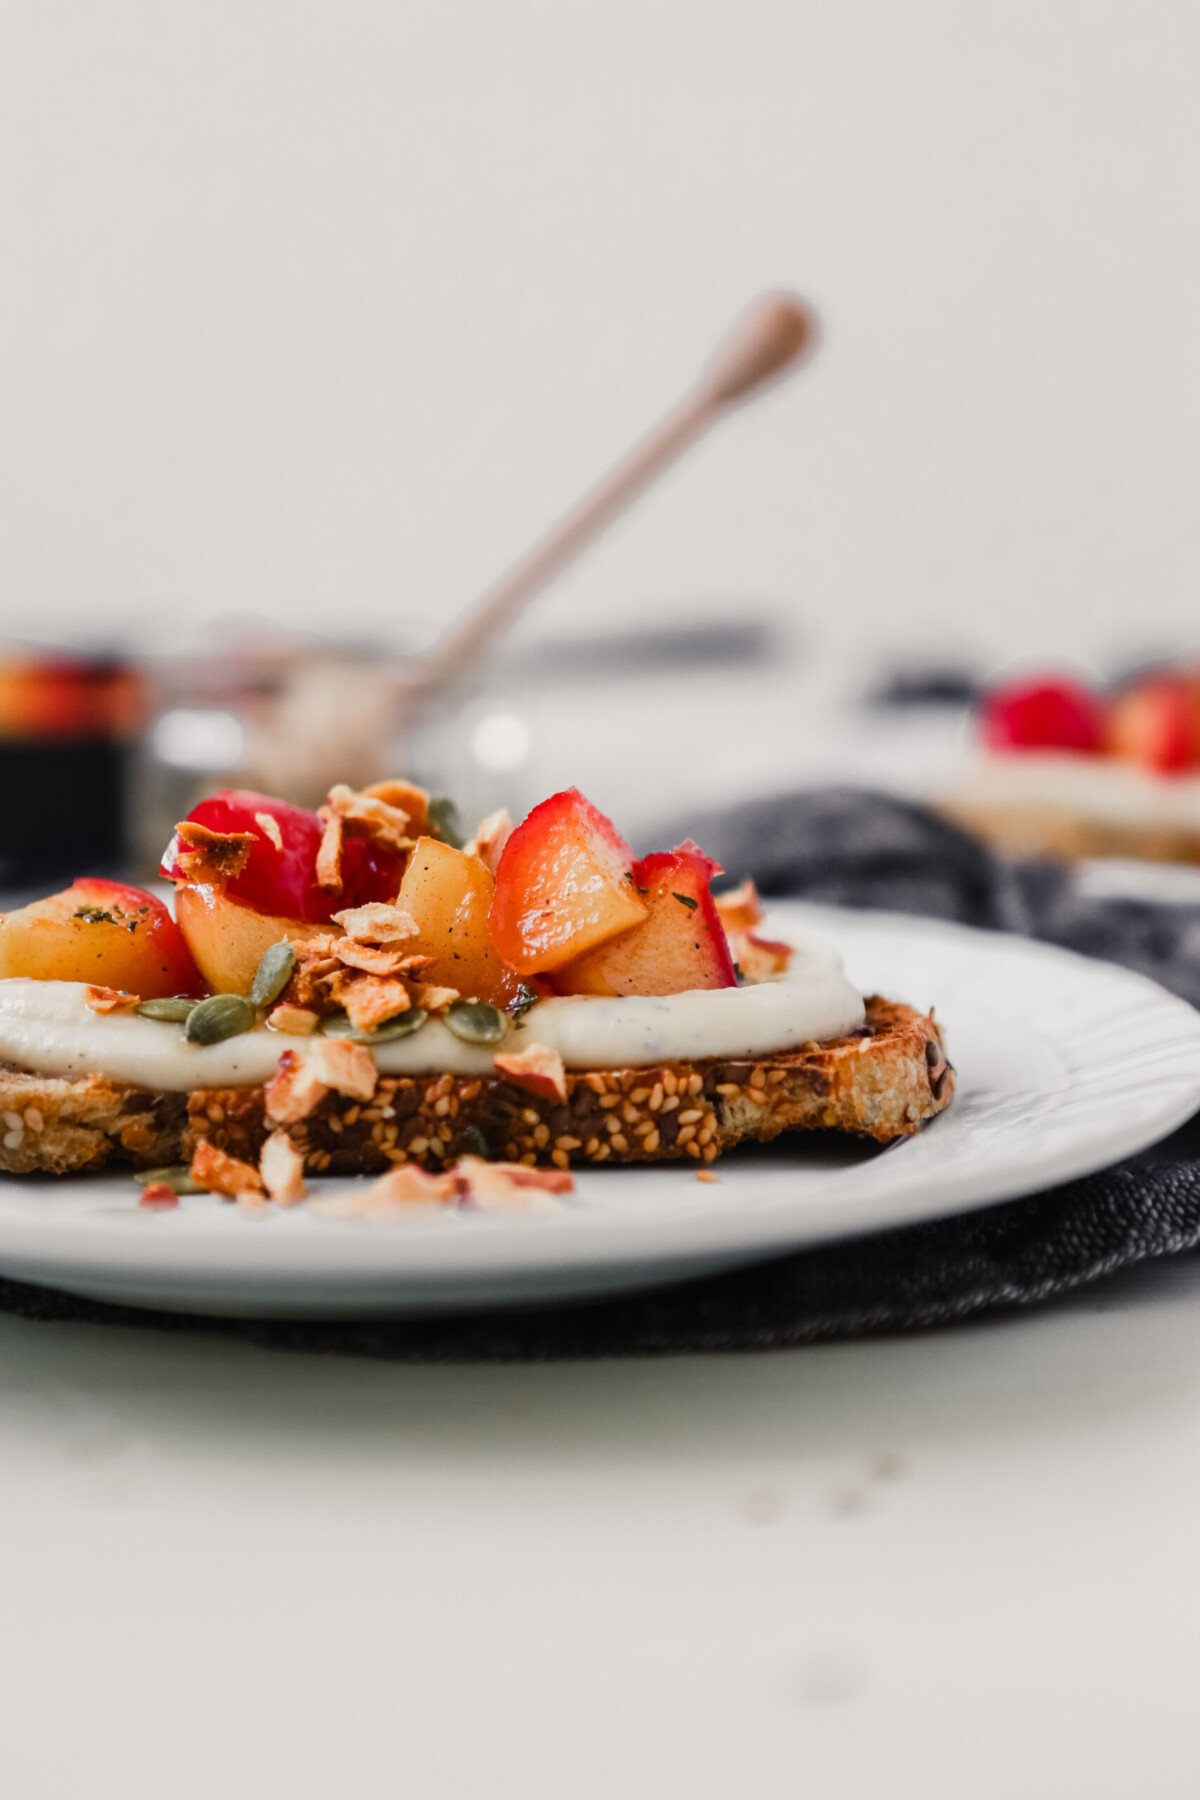 Photograph of wholegrain bread topped with ricotta, sauteed apples, and honey on a white plate